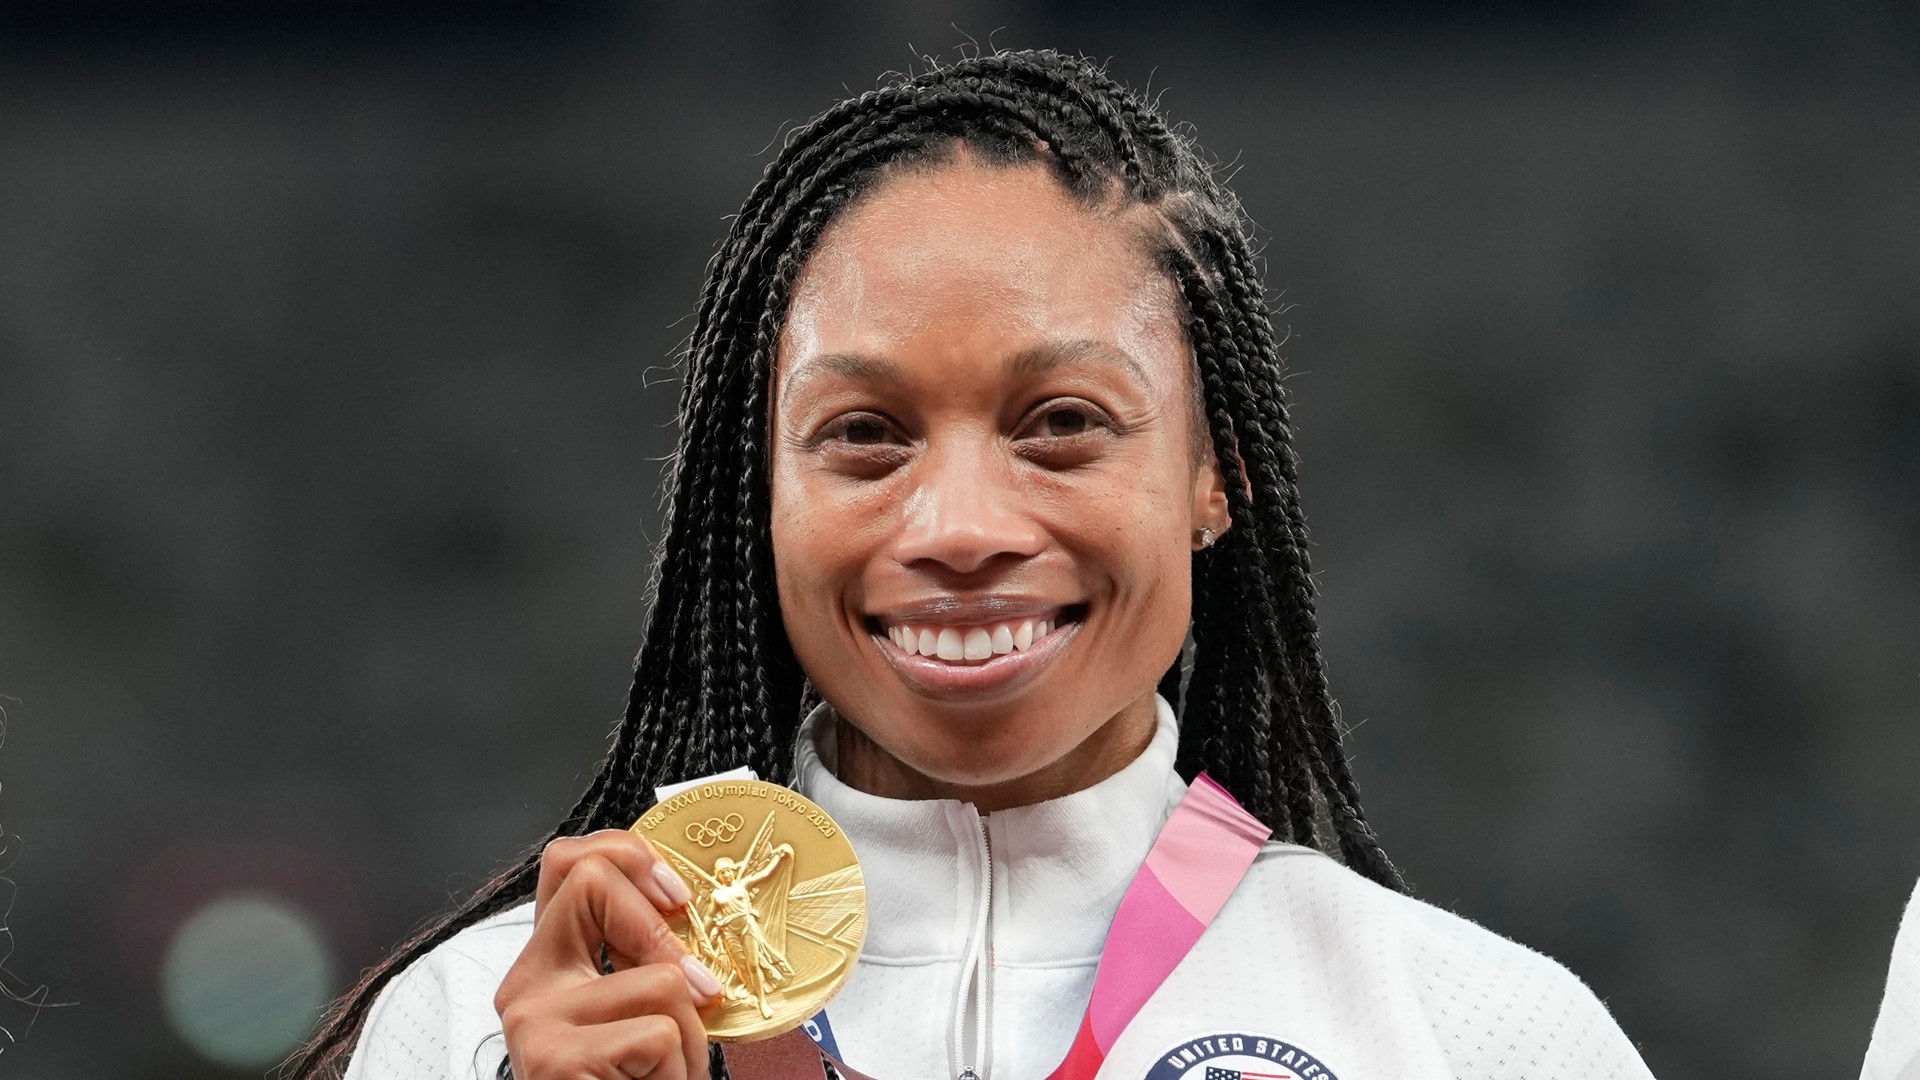 Allyson Felix now has the most U.S. track and field medals at the Olympics. Plus, the U.S. women's basketball team earned its 7th straight gold medal.